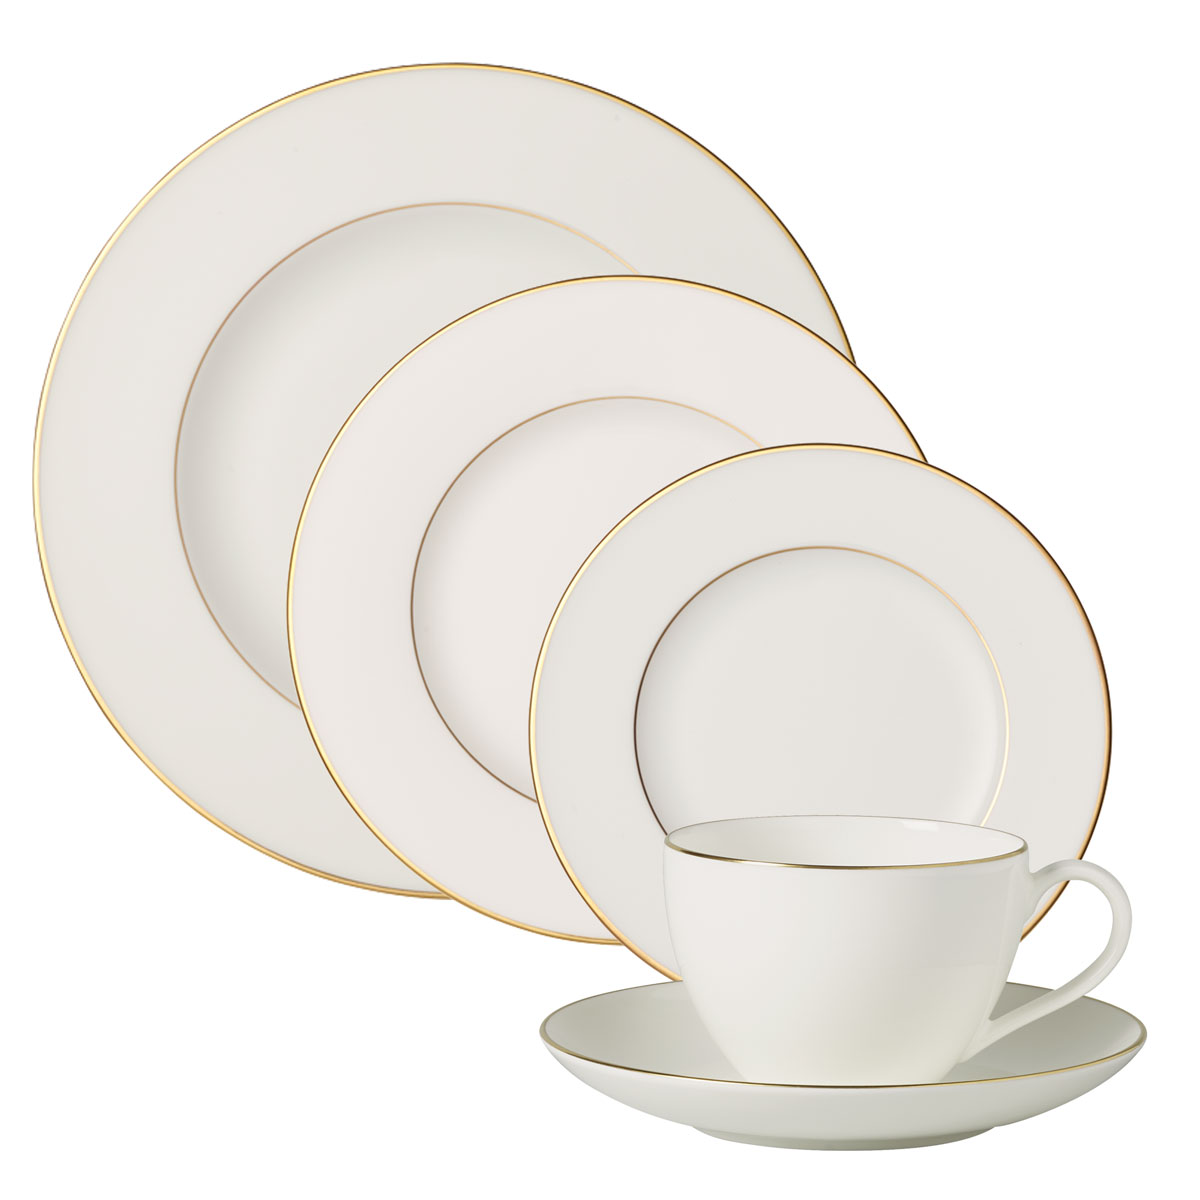 Villeroy and Boch Anmut Gold 5 Piece Place Setting